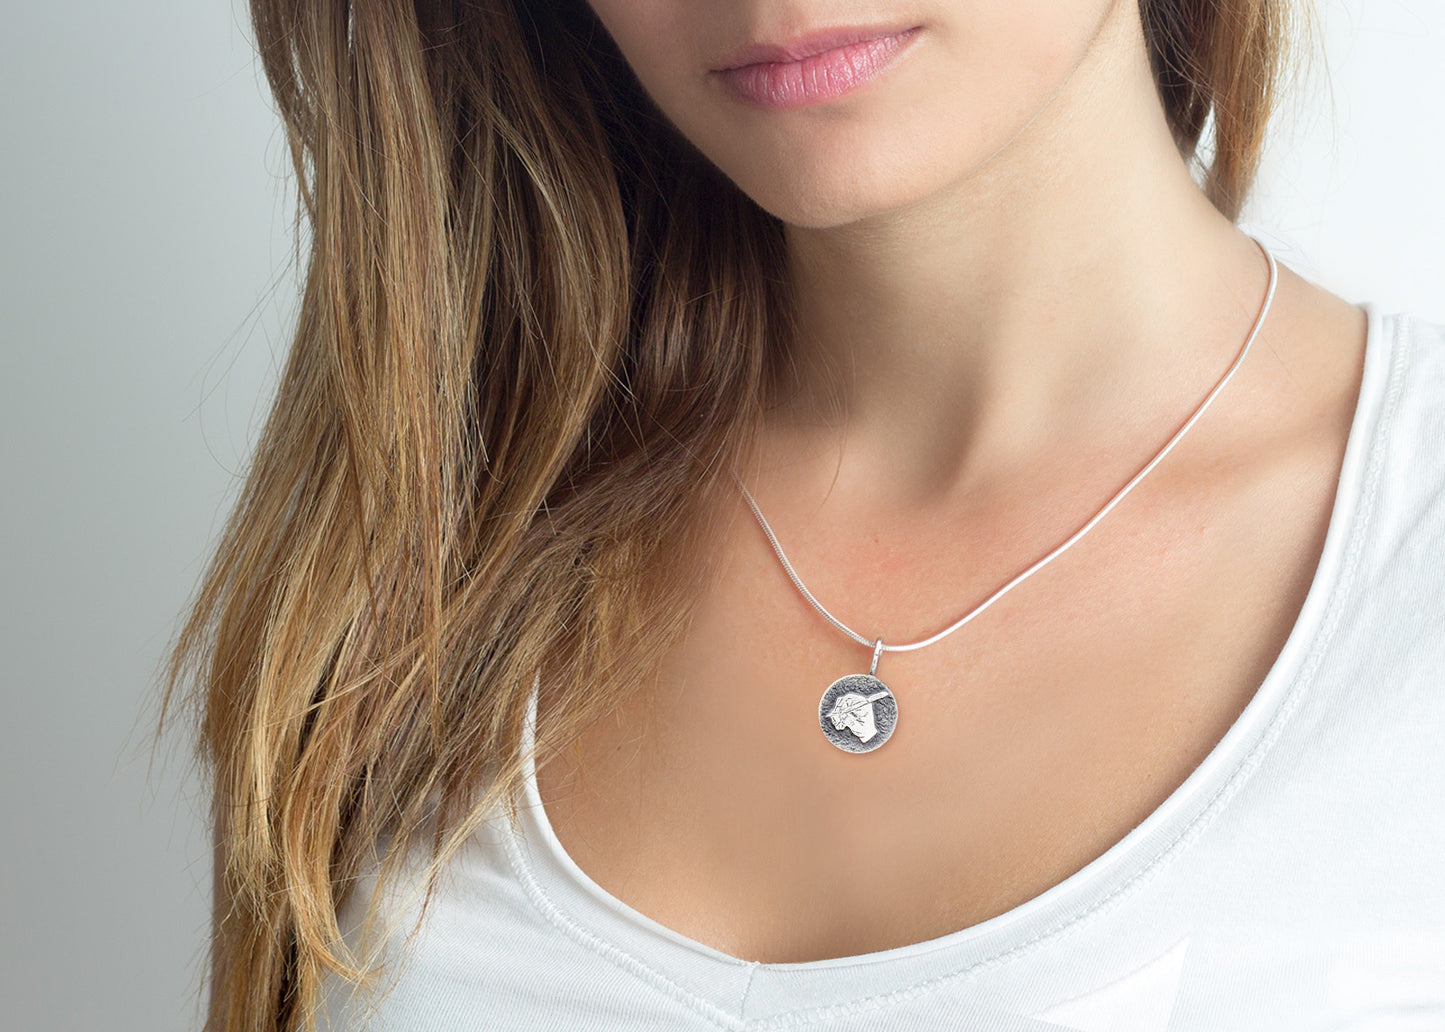 An amazing medallion necklace with the  The writing hand coin medallion